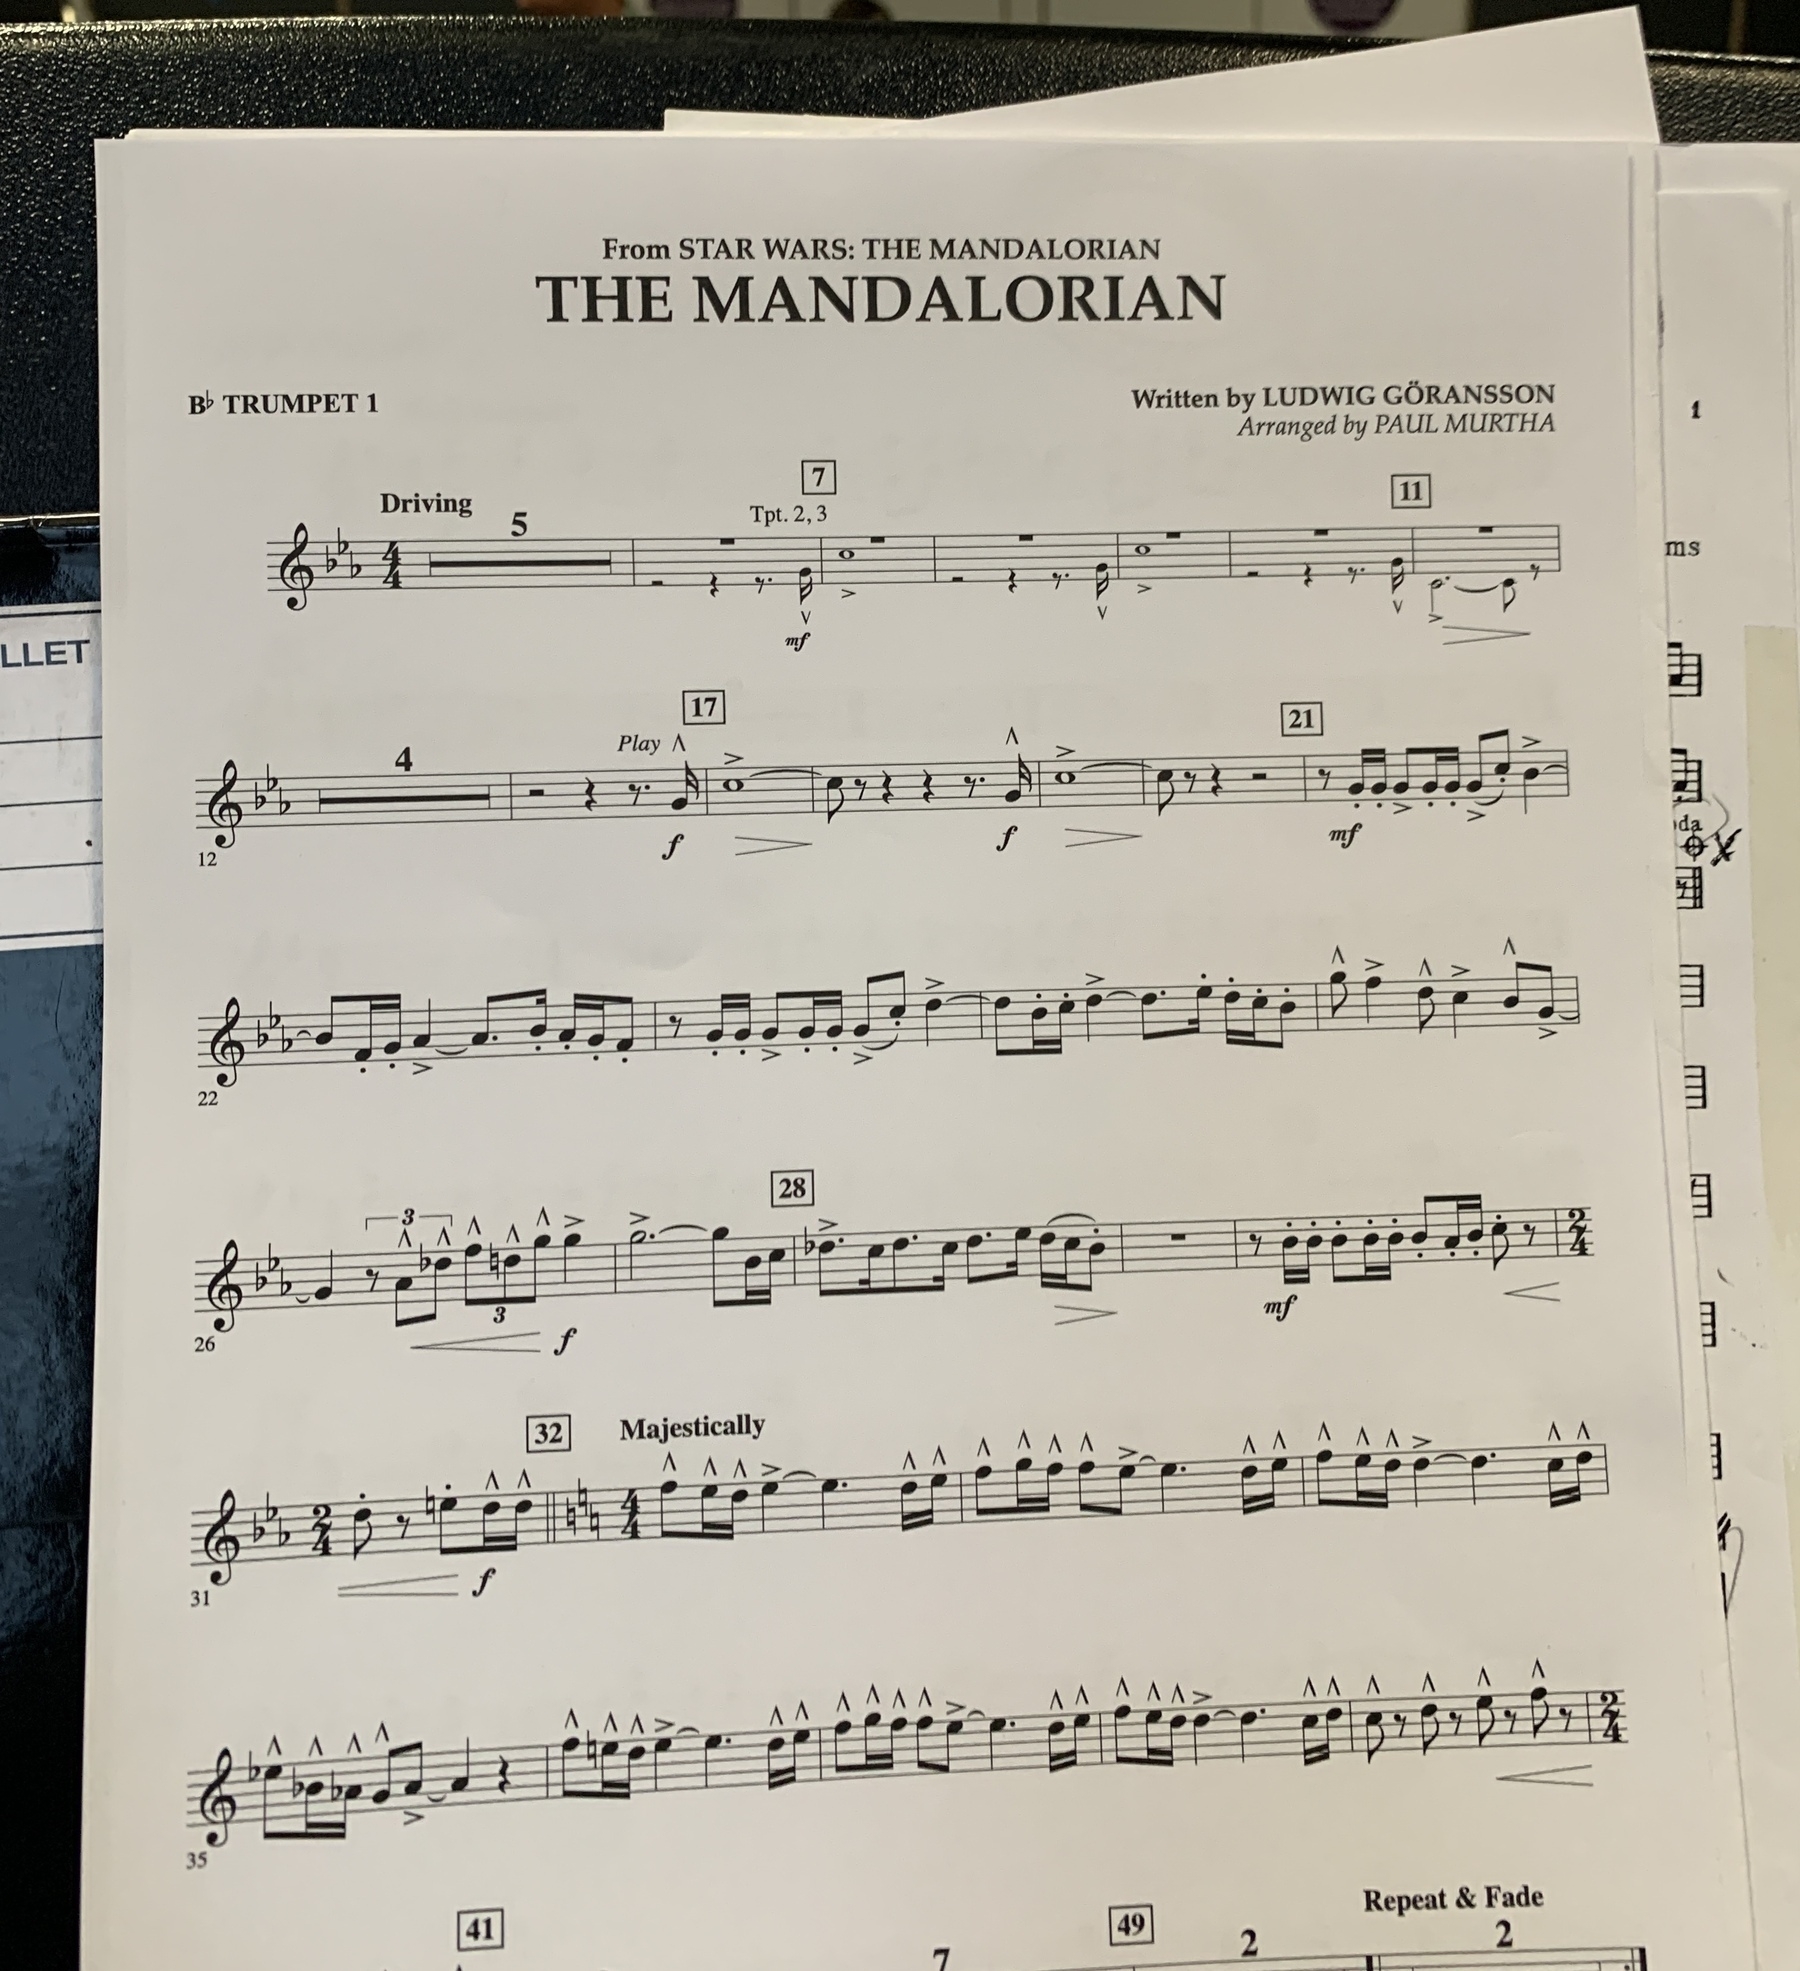 Photo of sheet music for The Mandalorian for first trumpet